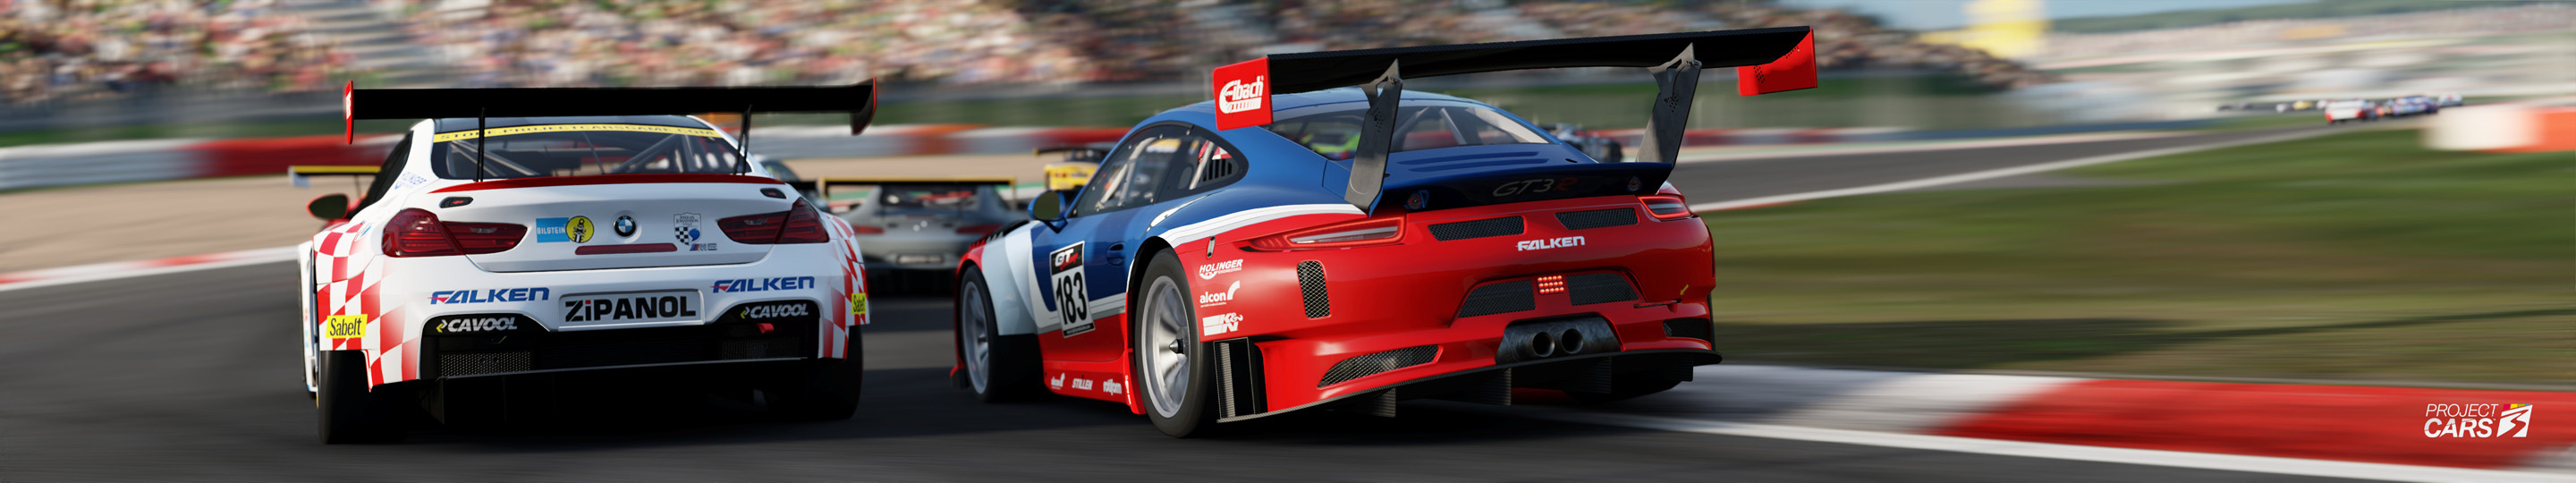 4 PROJECT CARS 3 PORSCHE 911 GT3 R at NURBURGRING copy.jpg